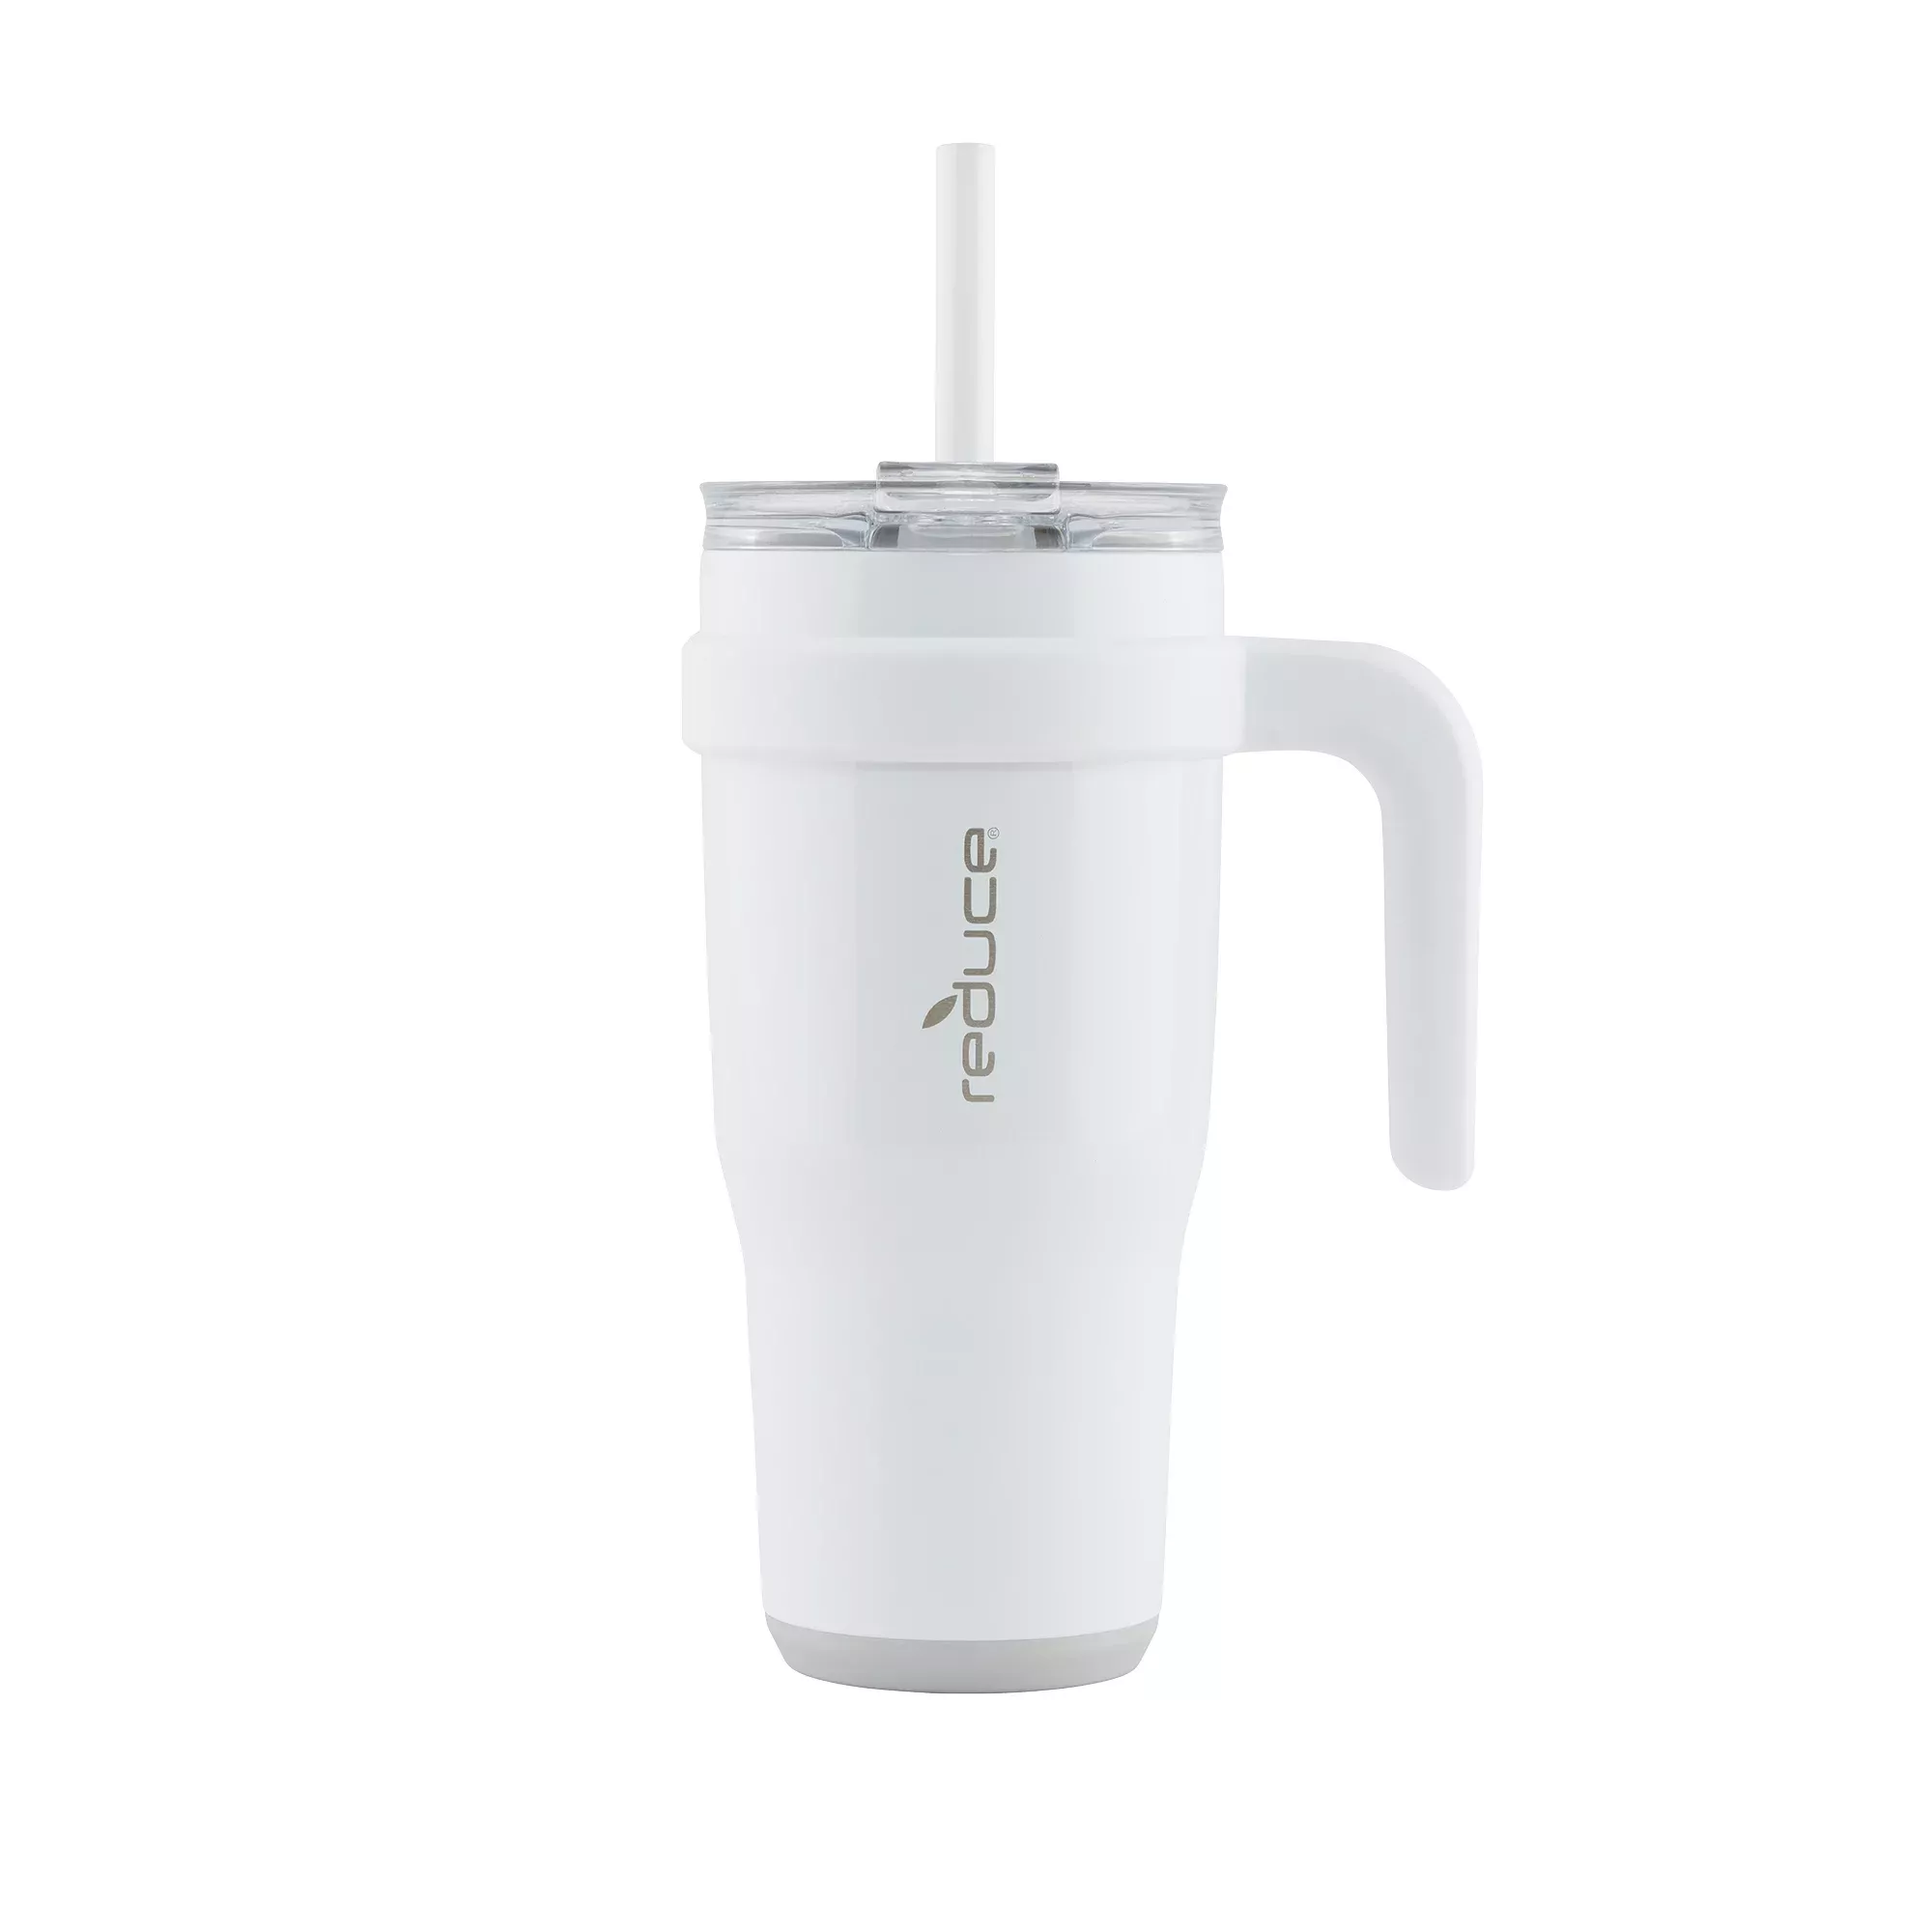 Reduce 40oz Cold1 Vacuum Insulated Stainless Steel Straw Tumbler Mug White  : Target